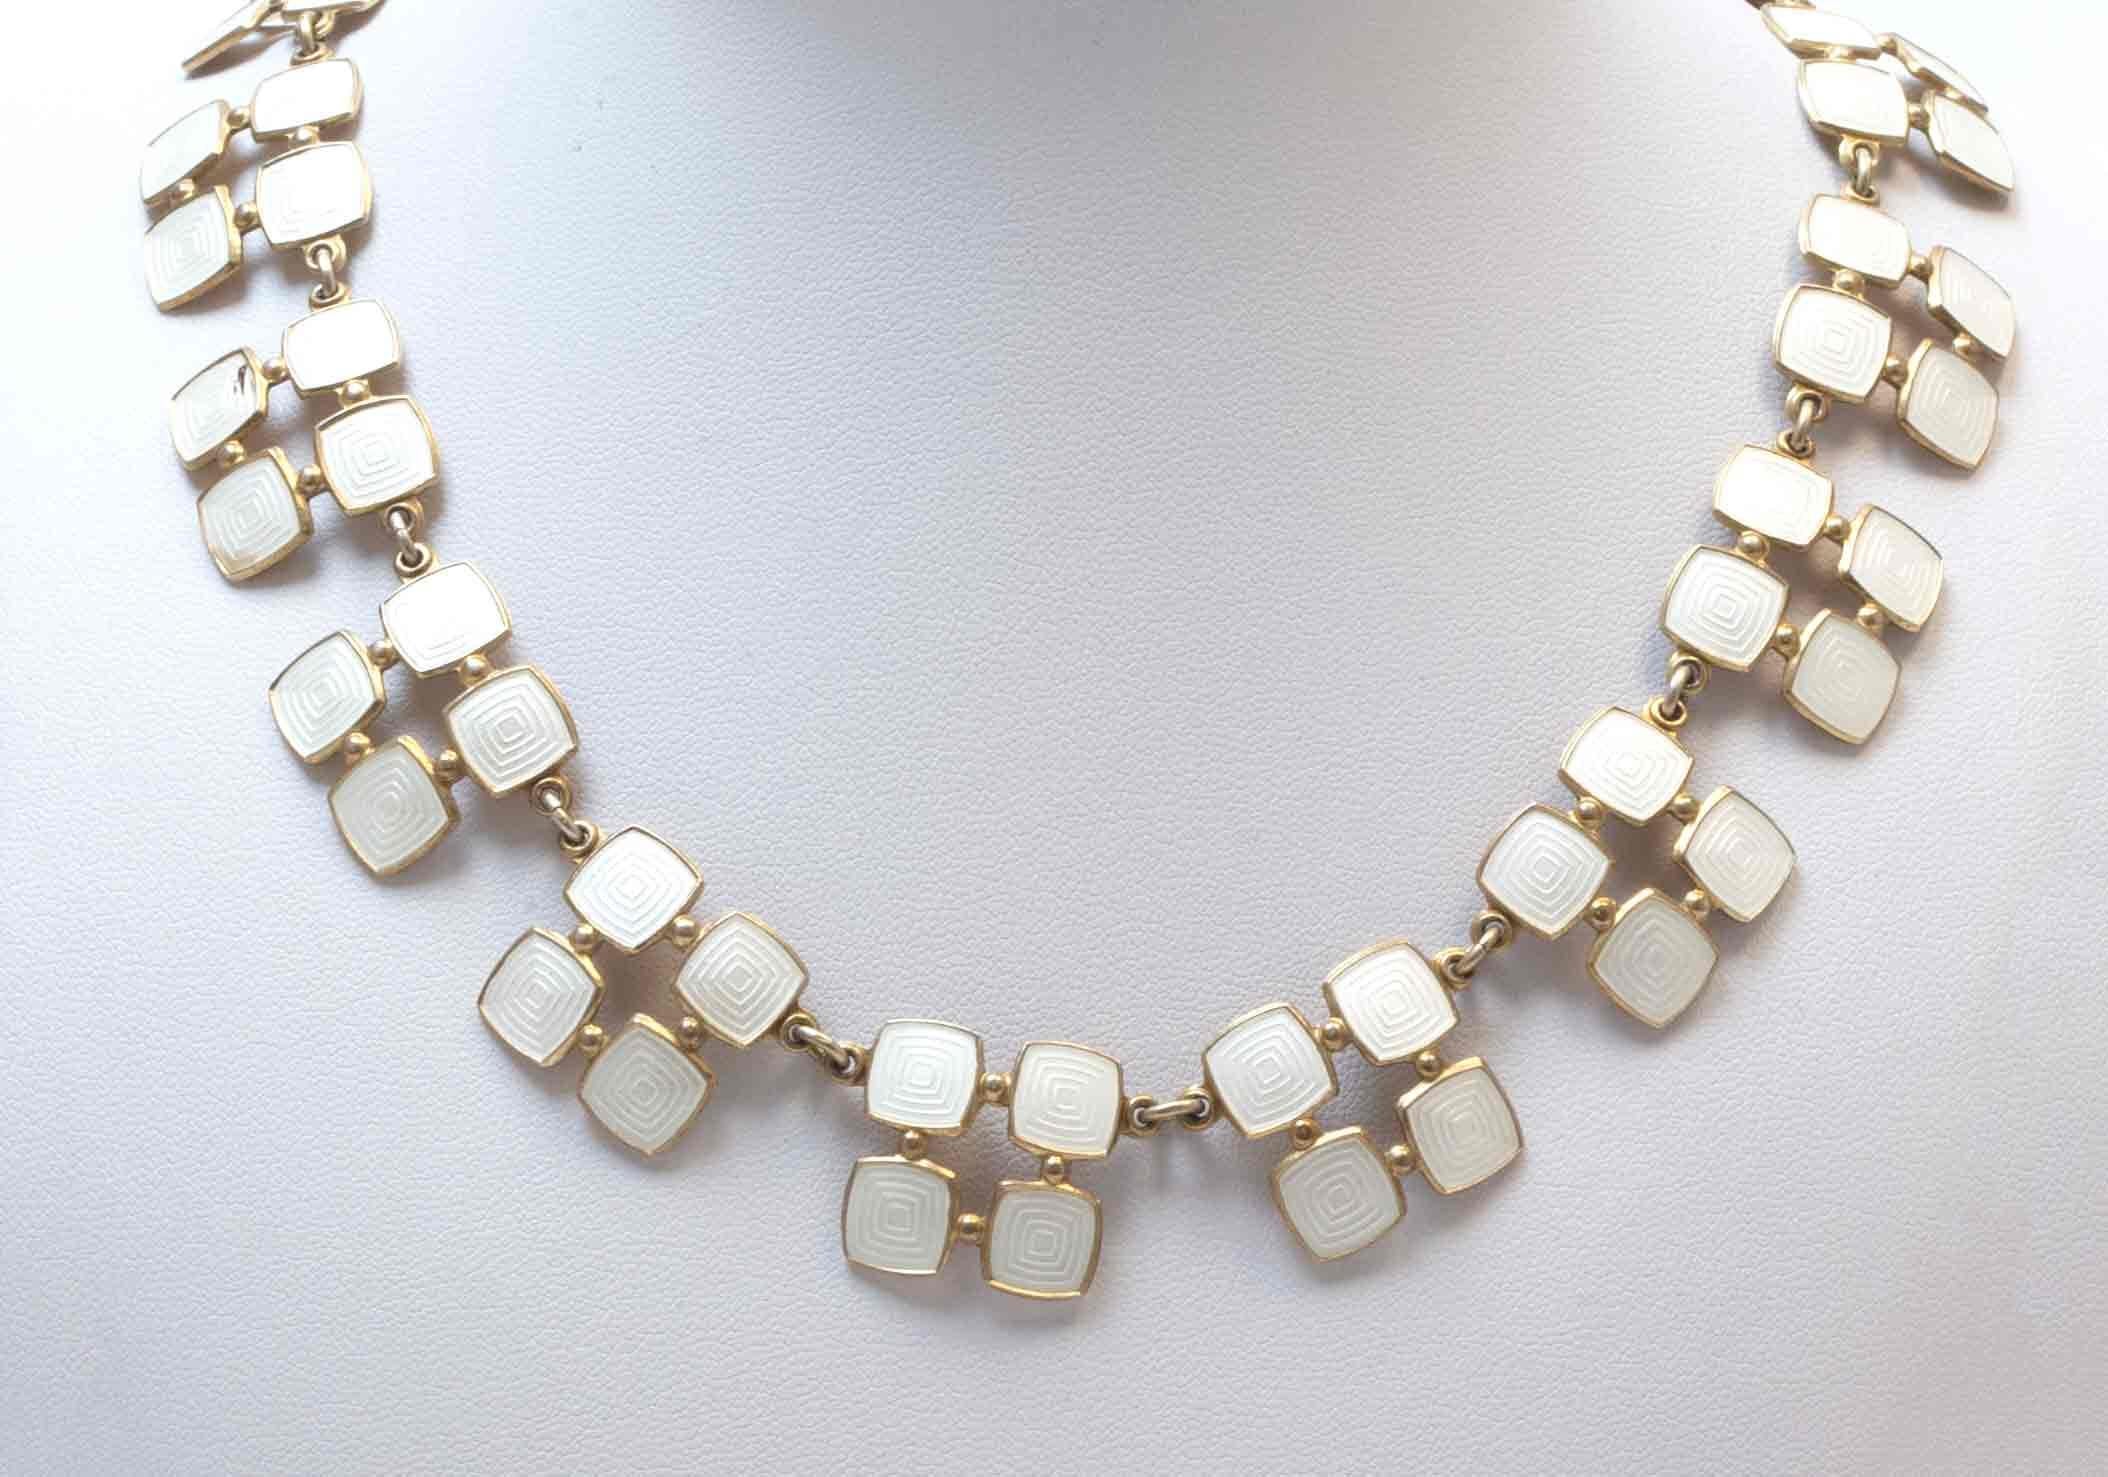 Modernist Silver and Enamel 1960s Collier Necklace by Willy Karlberg For Sale 2